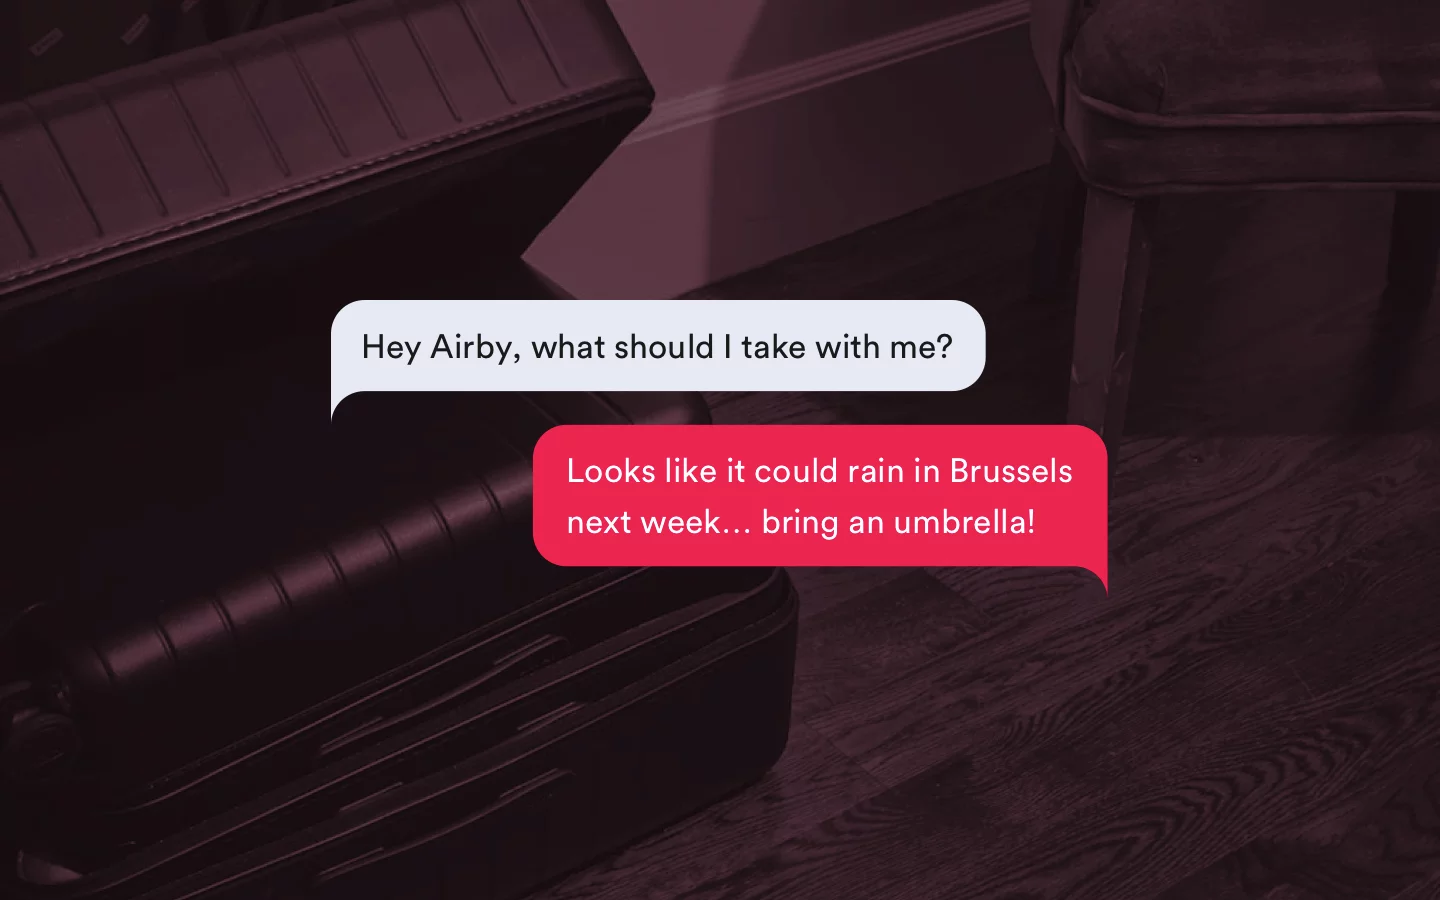 A conversation between a traveler and Airby, an intelligent voice assistant.